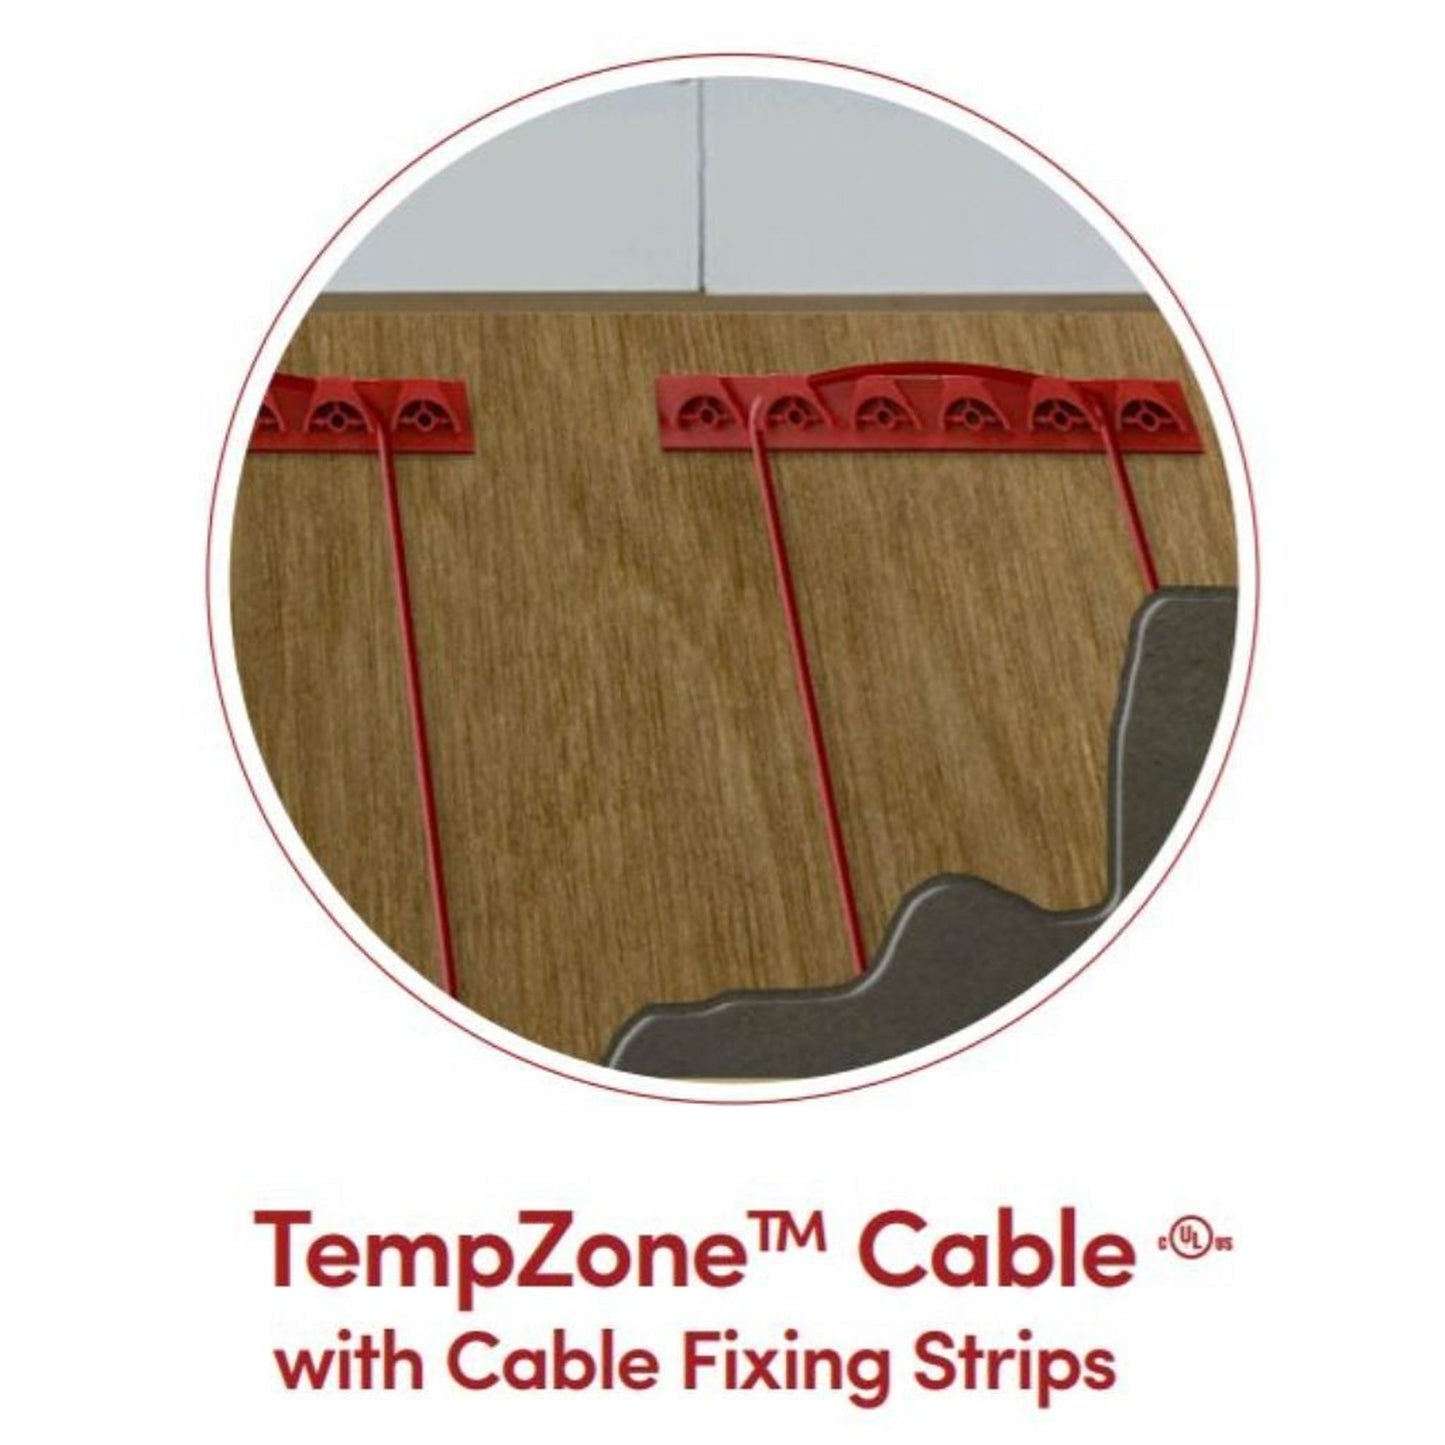 WarmlyYours TempZone Cable 30′ 120V Radiant Floor Heating Cable System Kit With nSpire Touch Programmable Touchscreen Thermostat